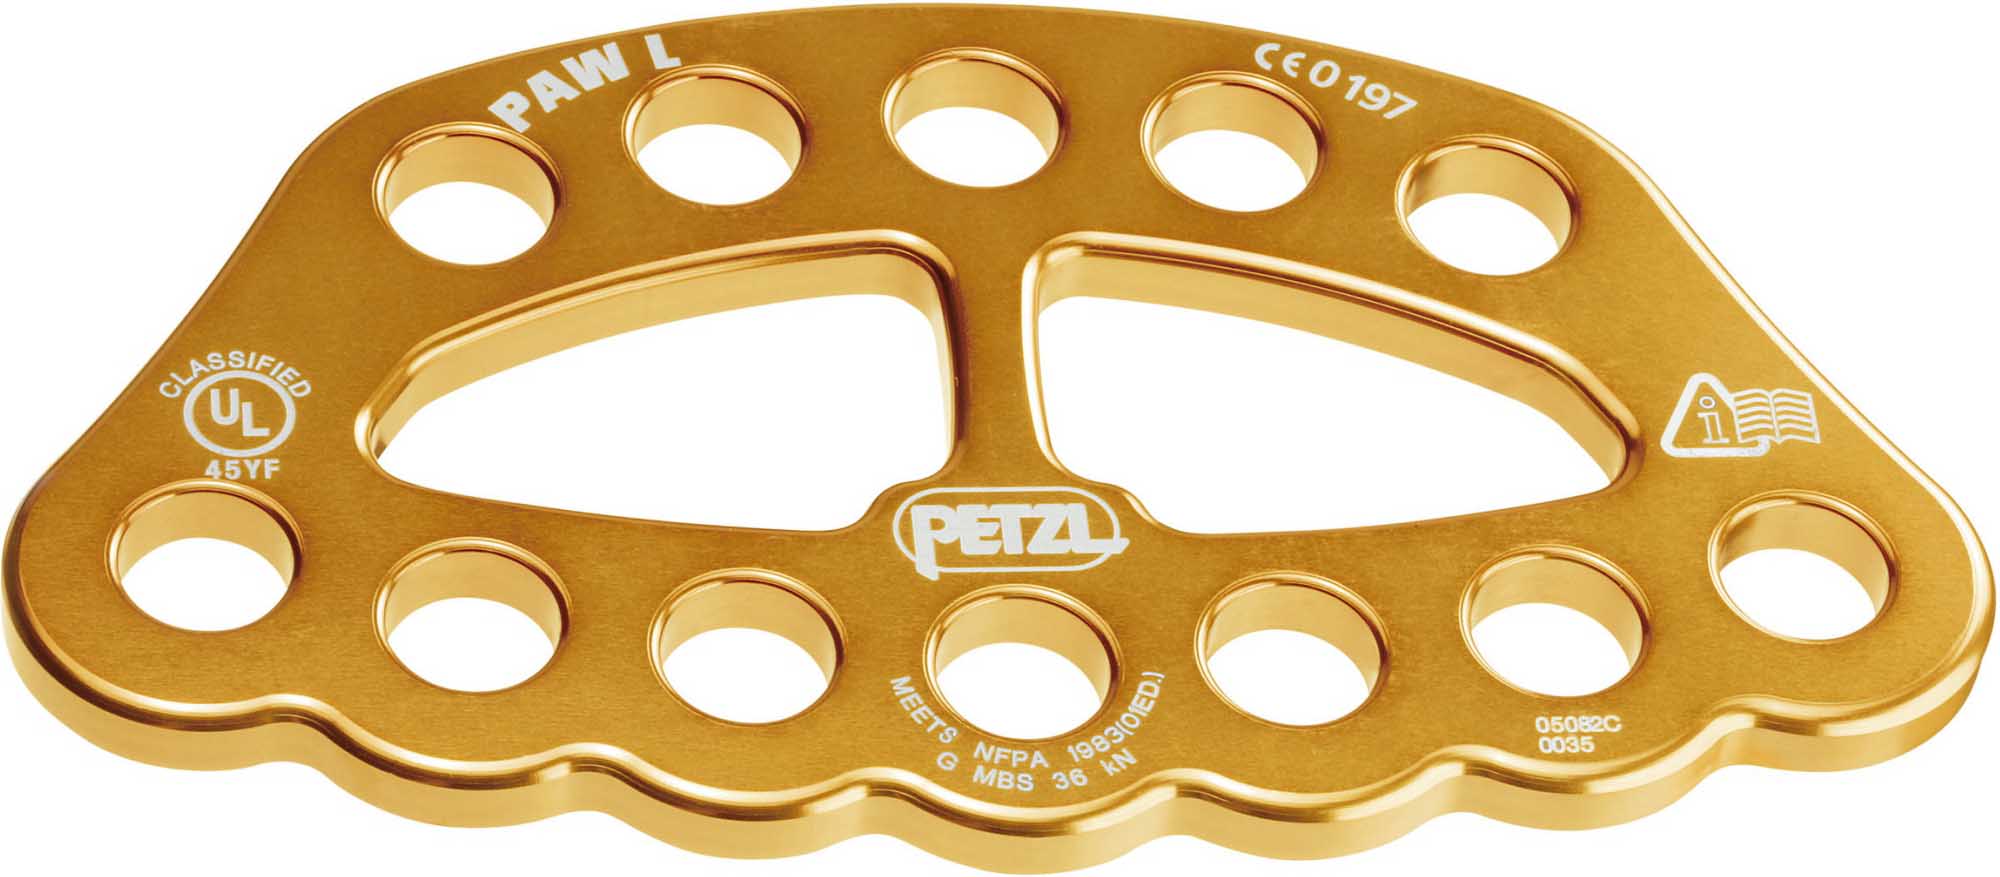 Petzl Paw Rigging Anchor Plate - Large from Columbia Safety